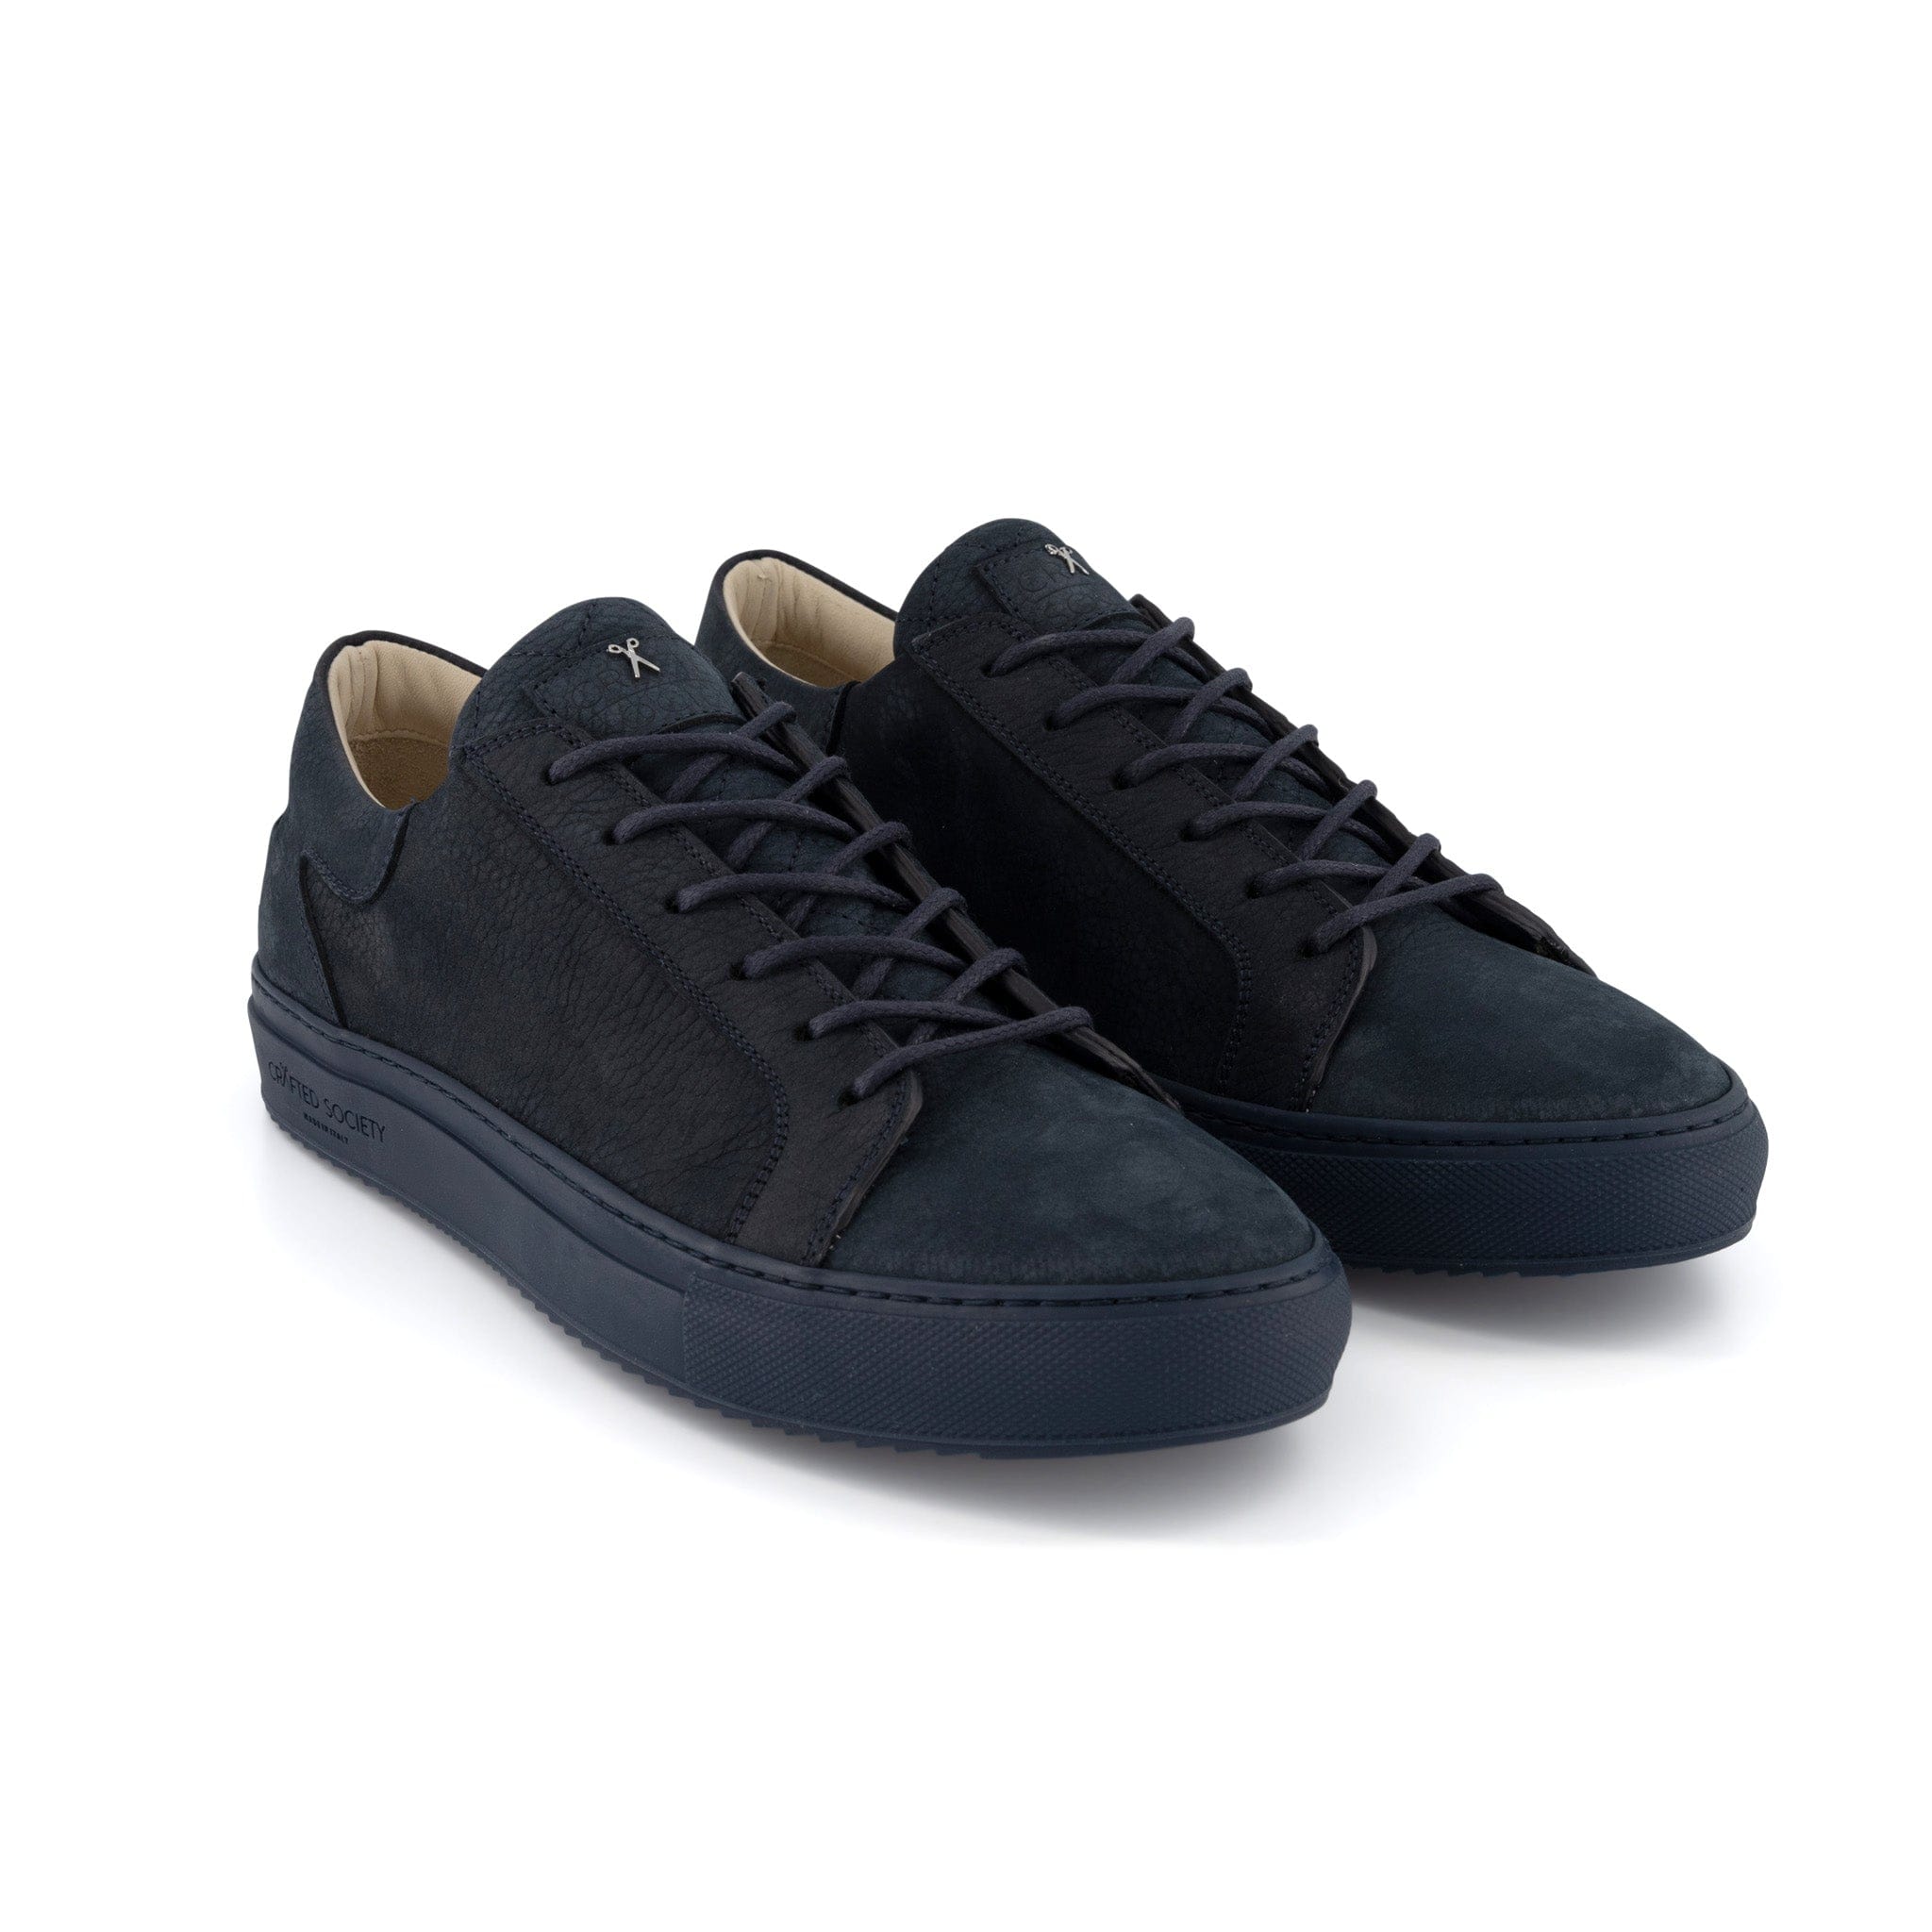 Mario Low Refined Sneaker | Navy Nubuck | Navy Outsole | Made in Italy | Sizes 38, 40, 41 & 42